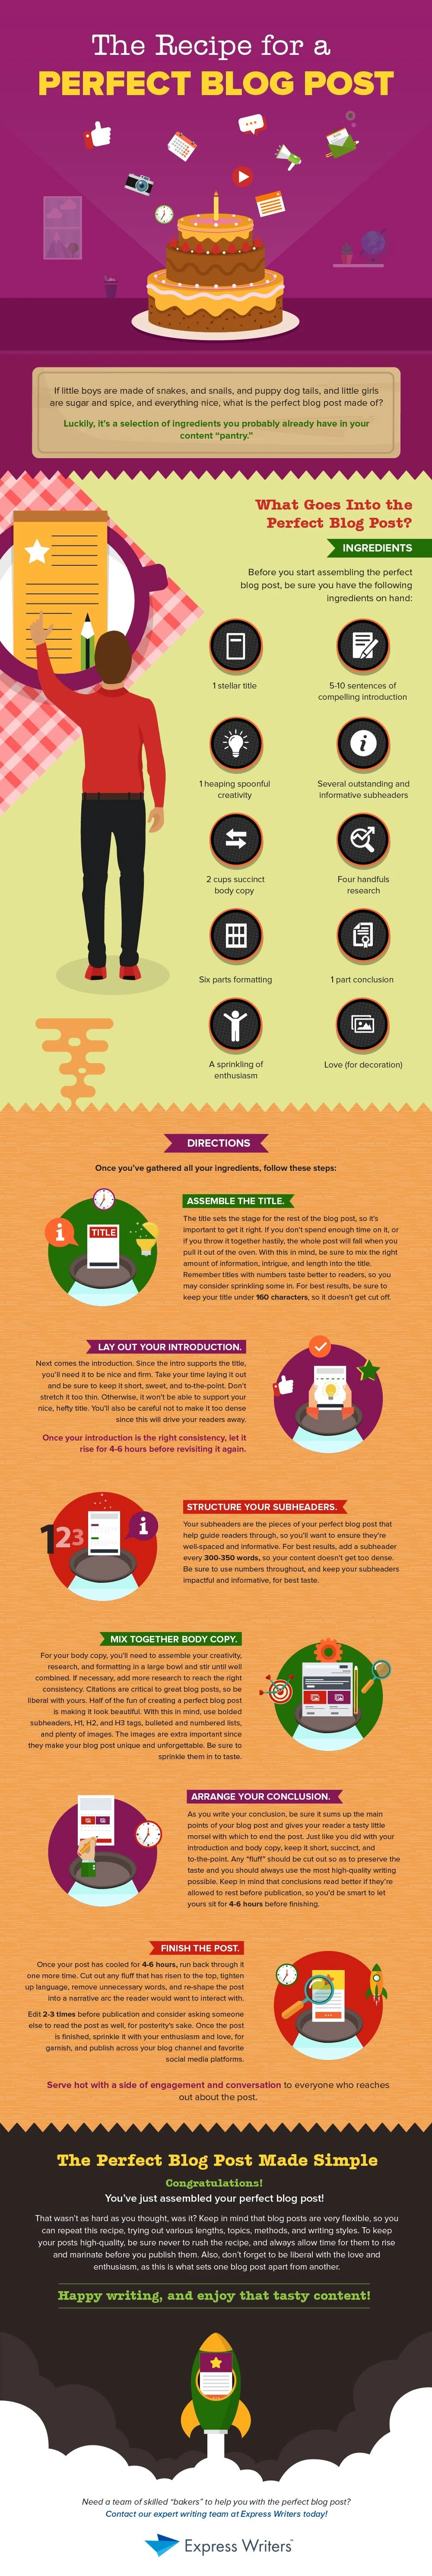 The Recipe for a Perfect Blog Post - #Infographic